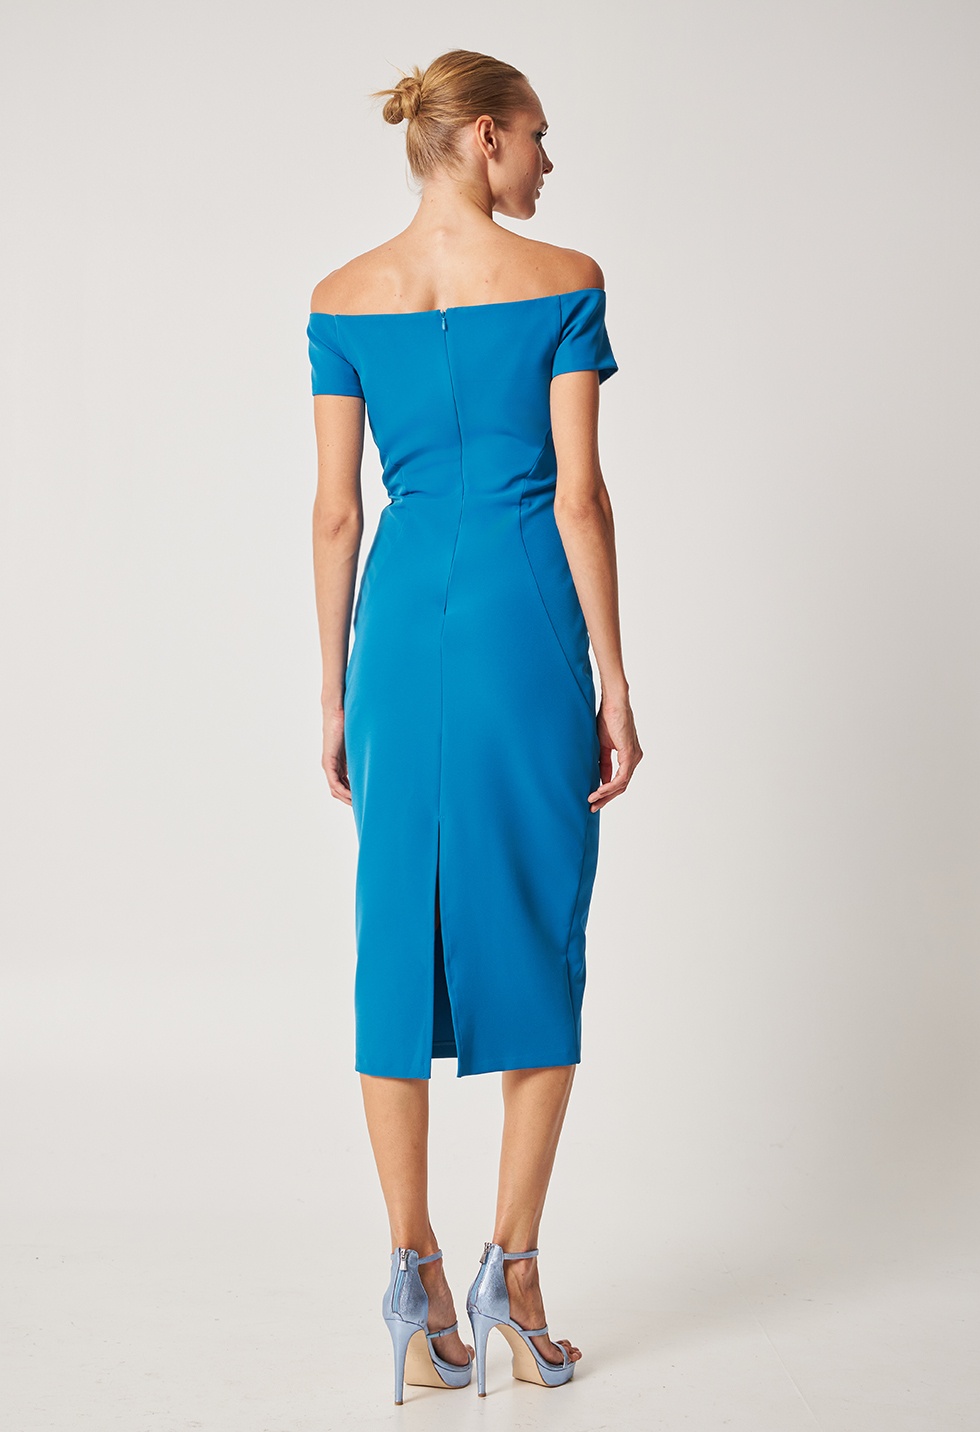 Fitted dress with open shoulders